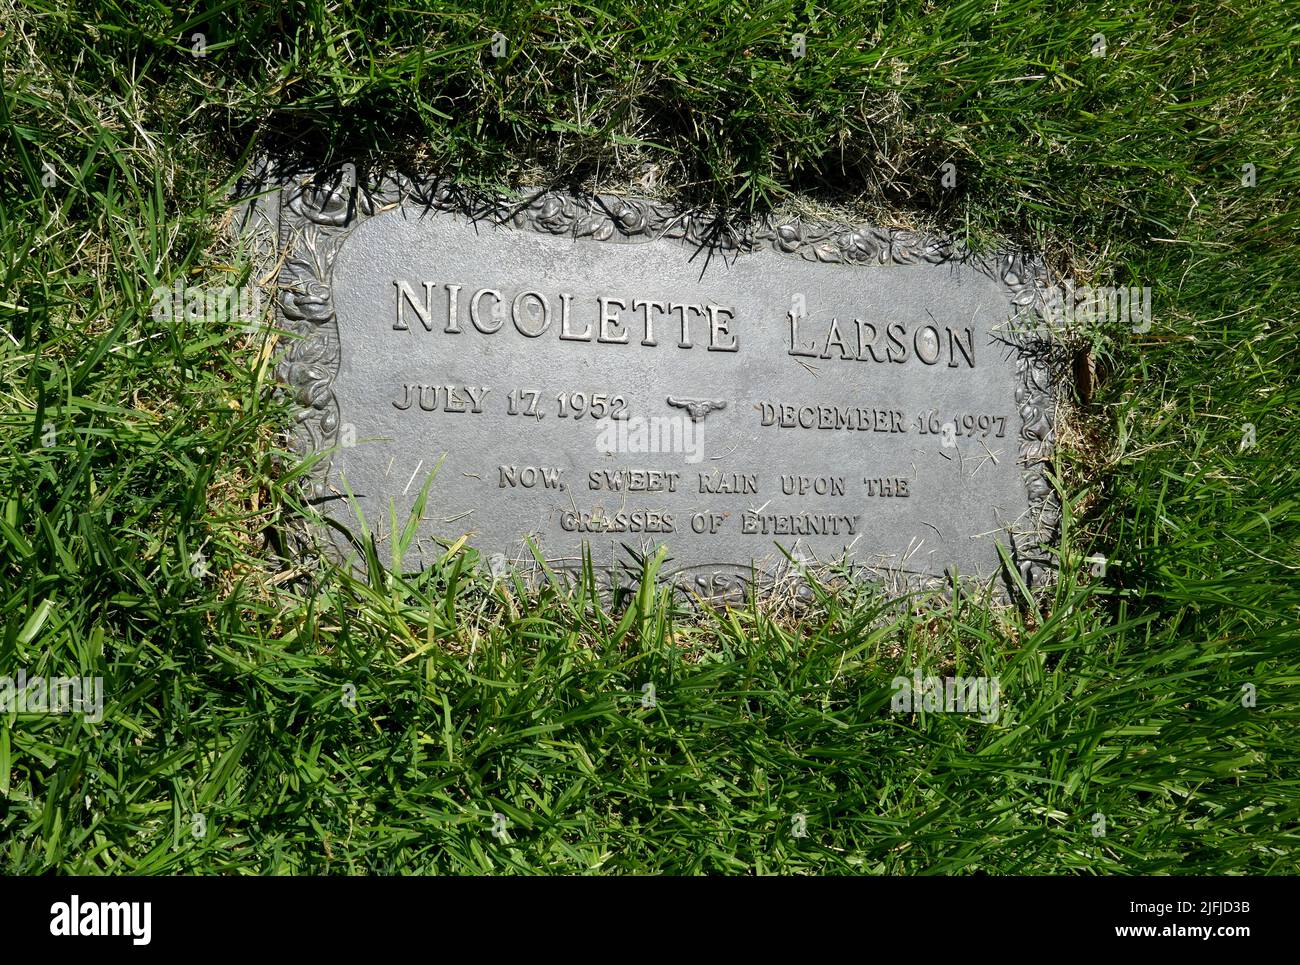 Los Angeles, California, USA 19th June 2022 Singer Nicolette Larson's Grave in Murmuring Trees Section at Forest Lawn Memorial Park Hollywood Hills on June 19, 2022 in Los Angeles, California, USA. Photo by Barry King/Alamy Stock Photo Stock Photo